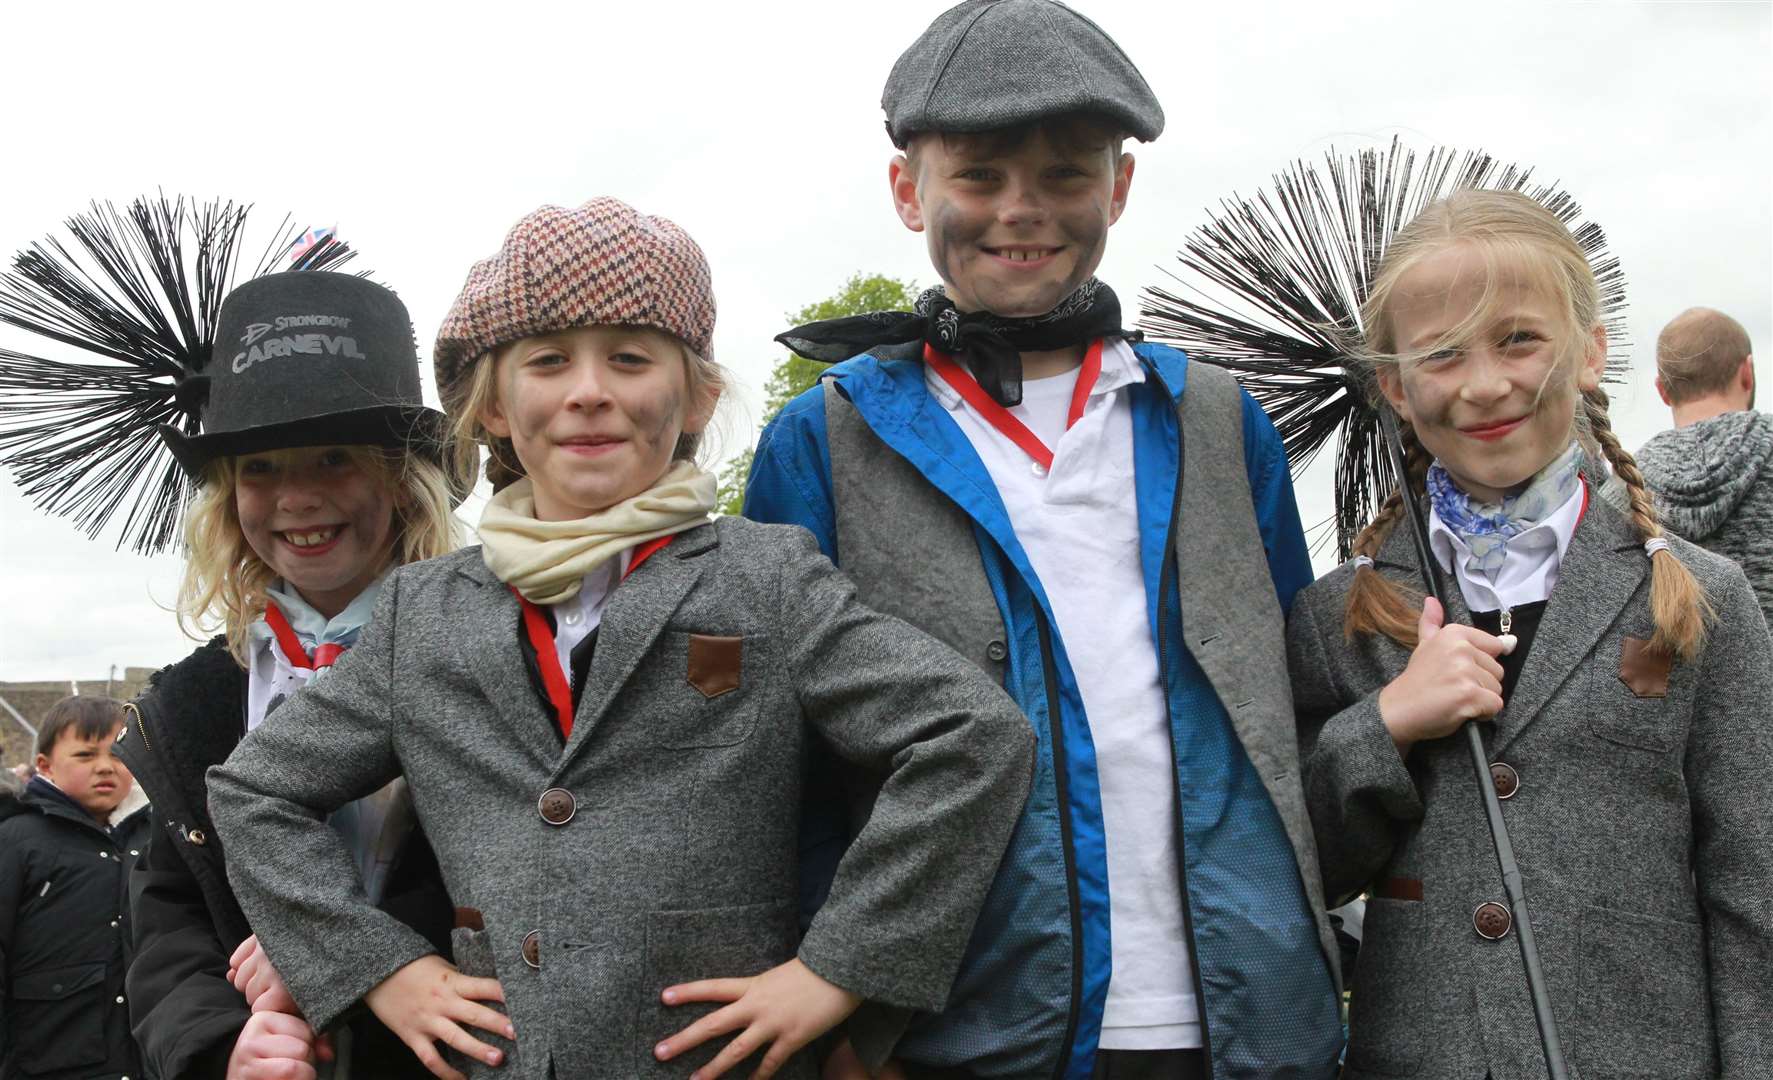 Members of Sheppey Scout group, dressed as chimney sweeps at the Sweeps Festival Picture: John Westhrop